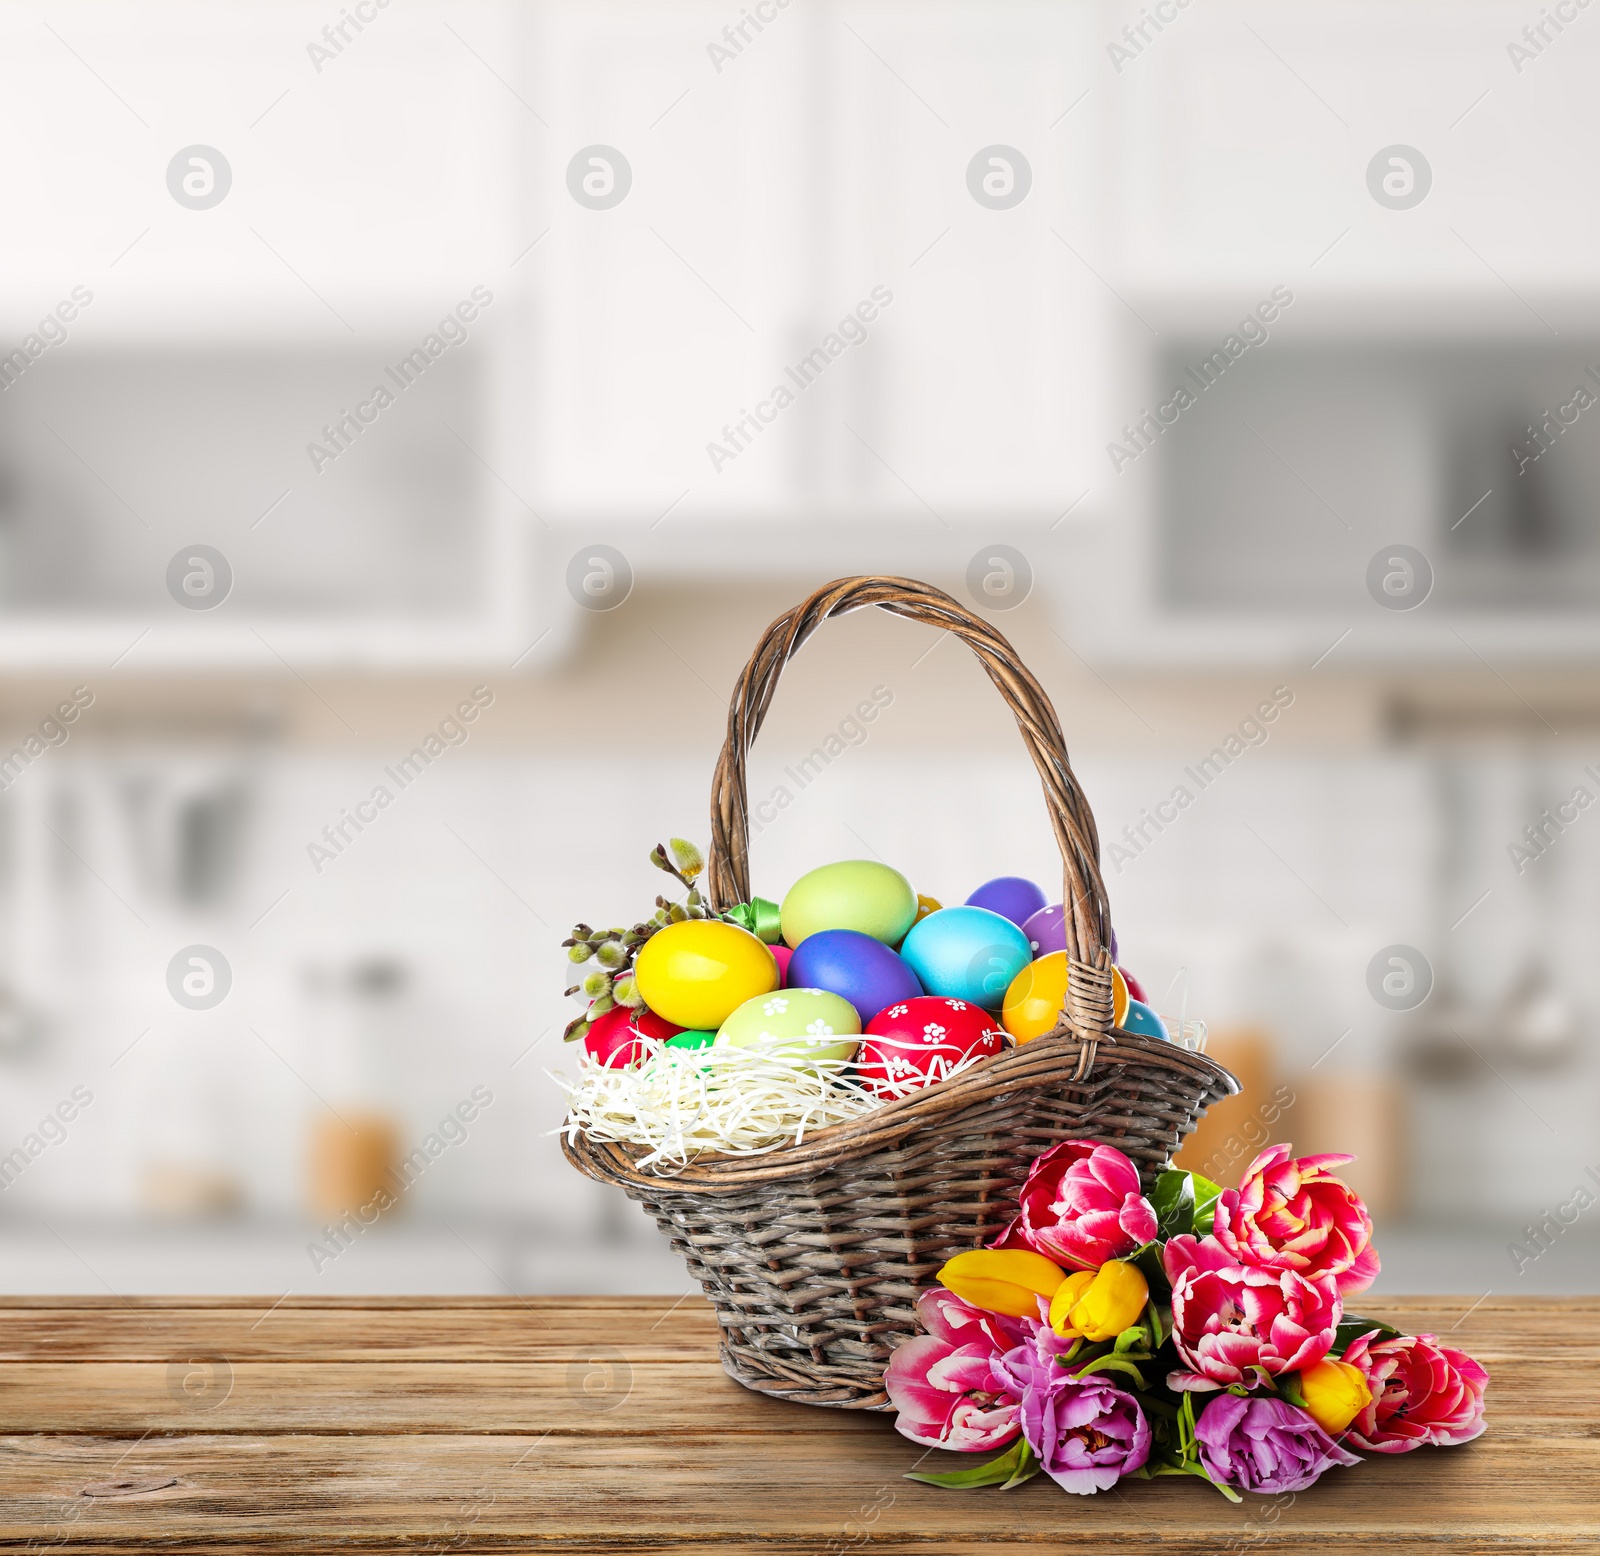 Image of Wicker basket with bright painted Easter eggs on wooden table indoors